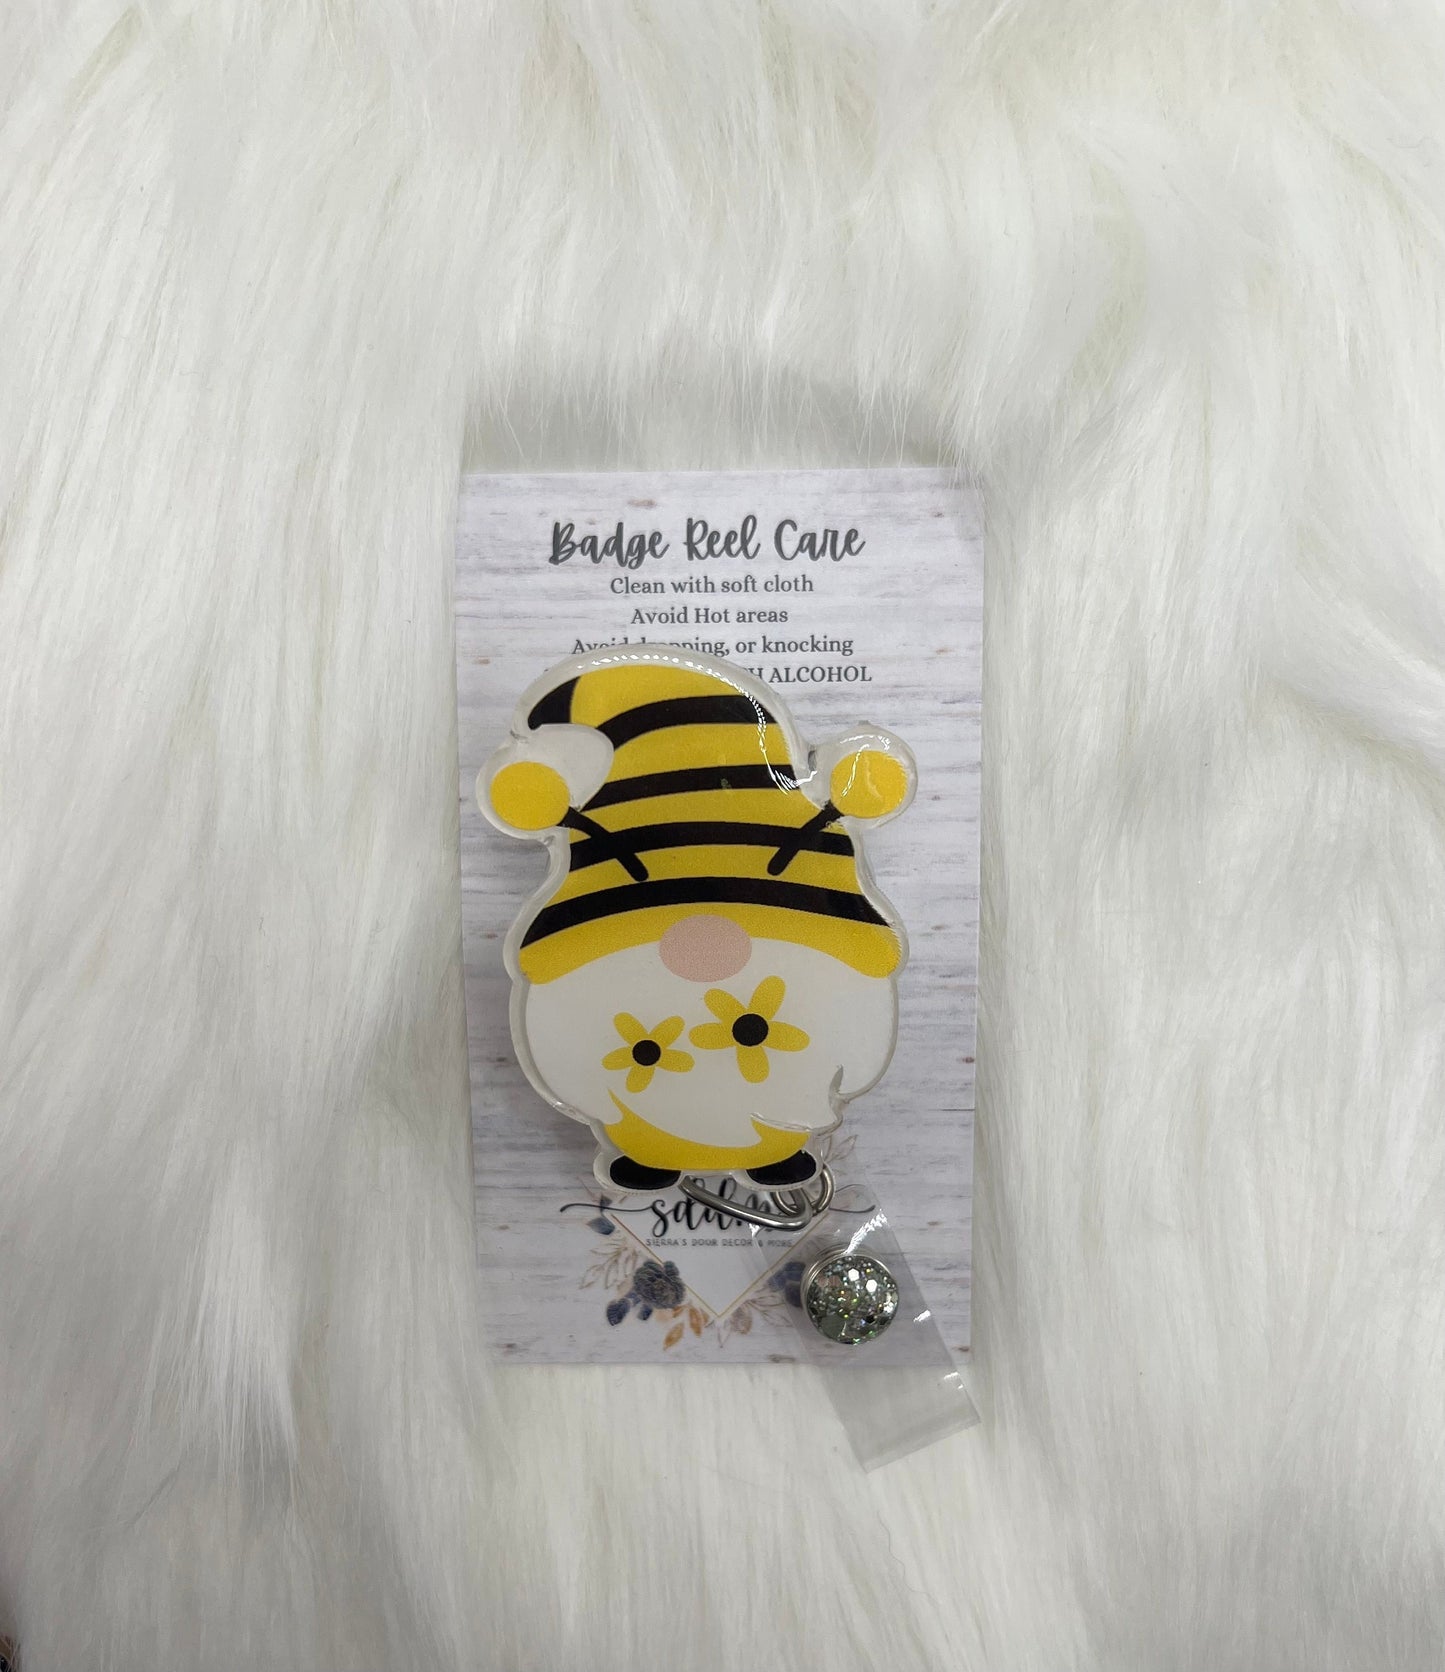 Bumble bee gnome badge reel- cute badge- mri safe- lanyard- teacher gifts- cna gifts- nurse gifts- gnome gifts